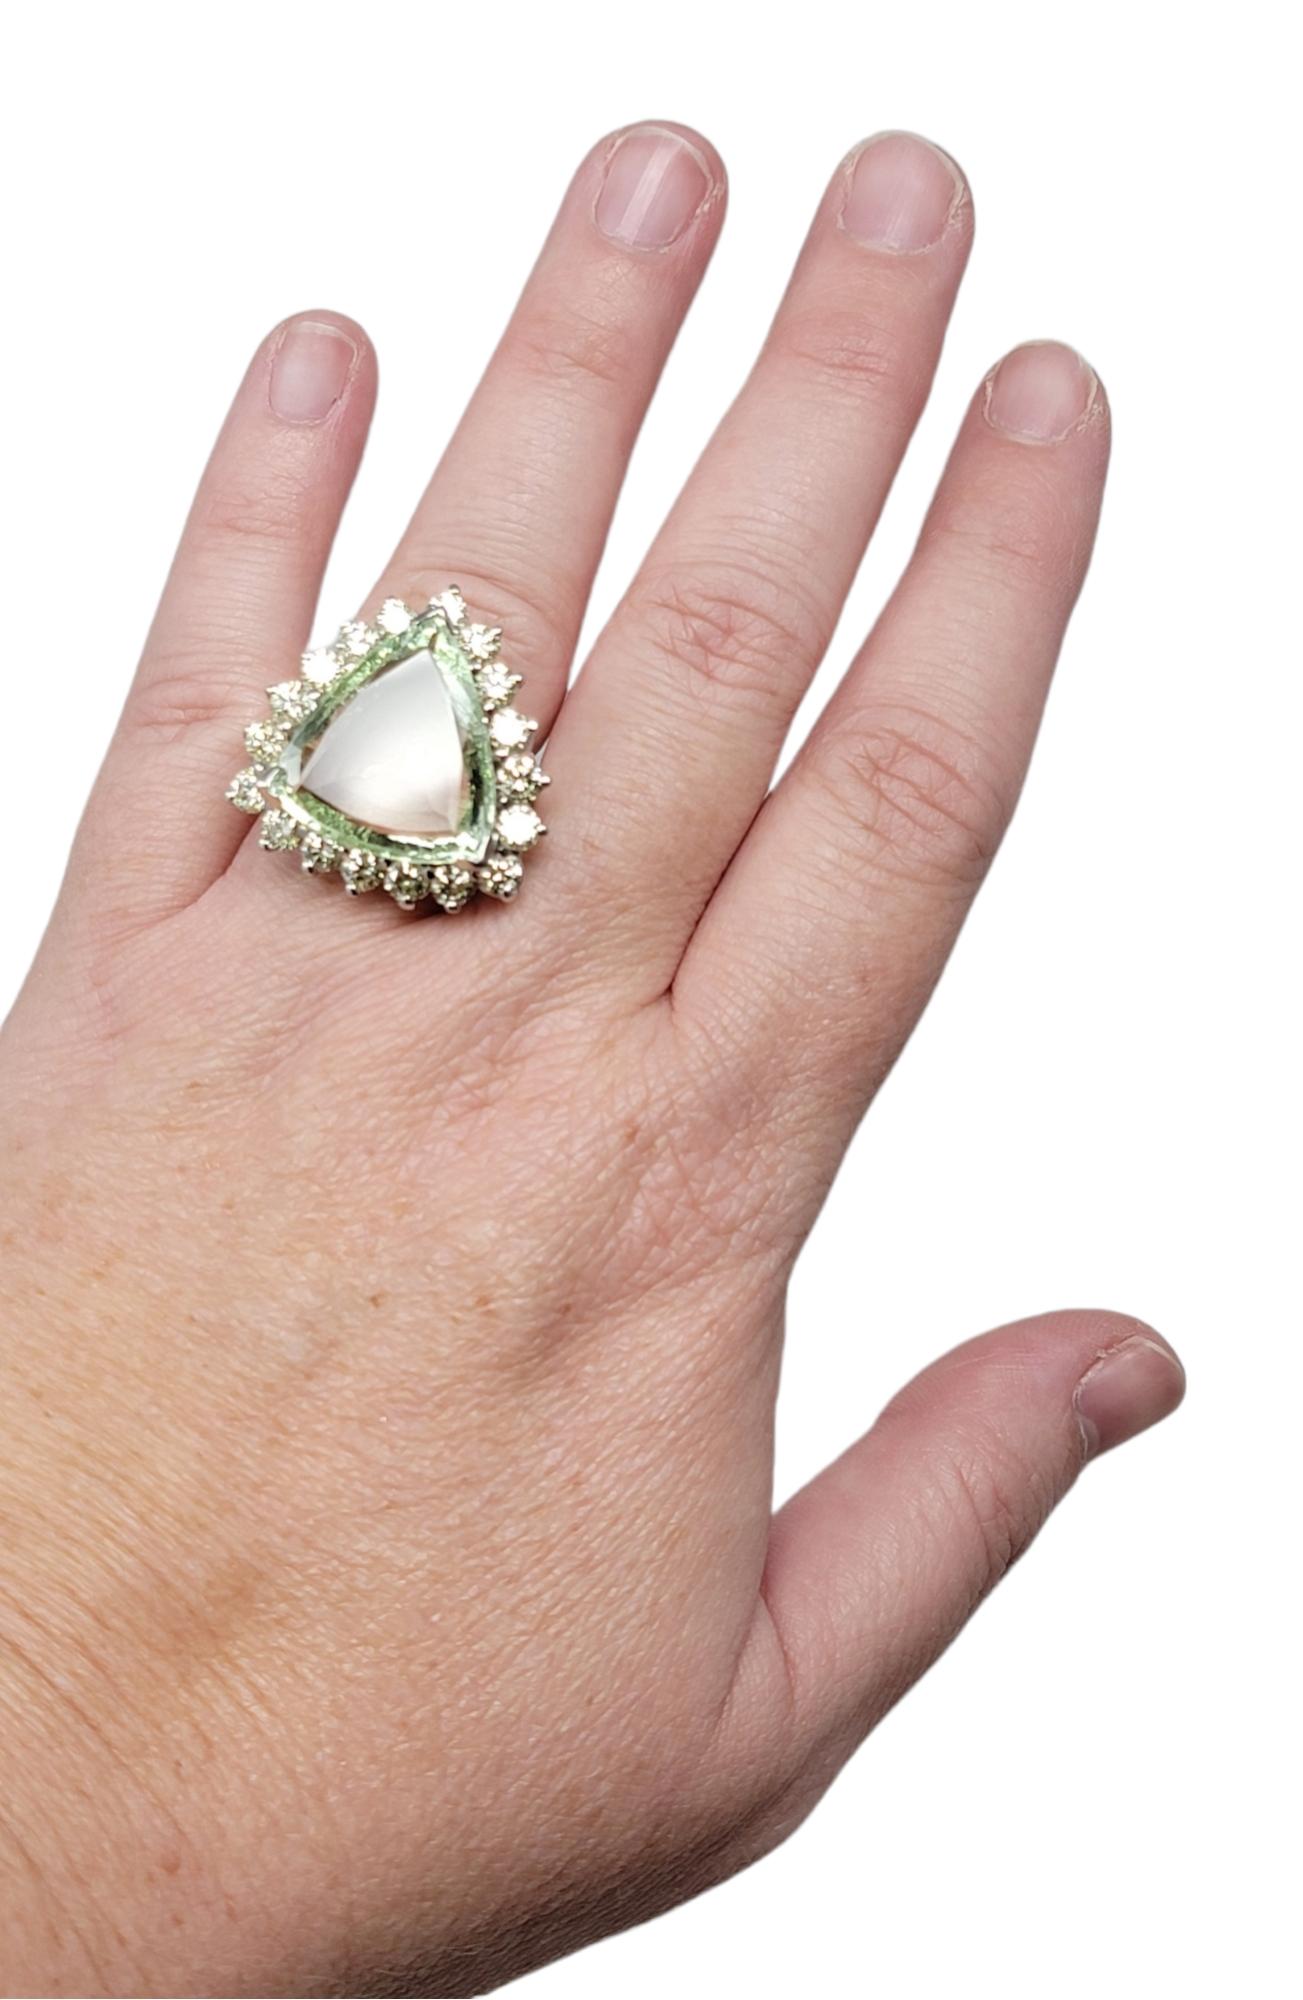 Large Triangular Mixed Cut Green Beryl and Diamond Halo Statement Cocktail Ring  For Sale 2